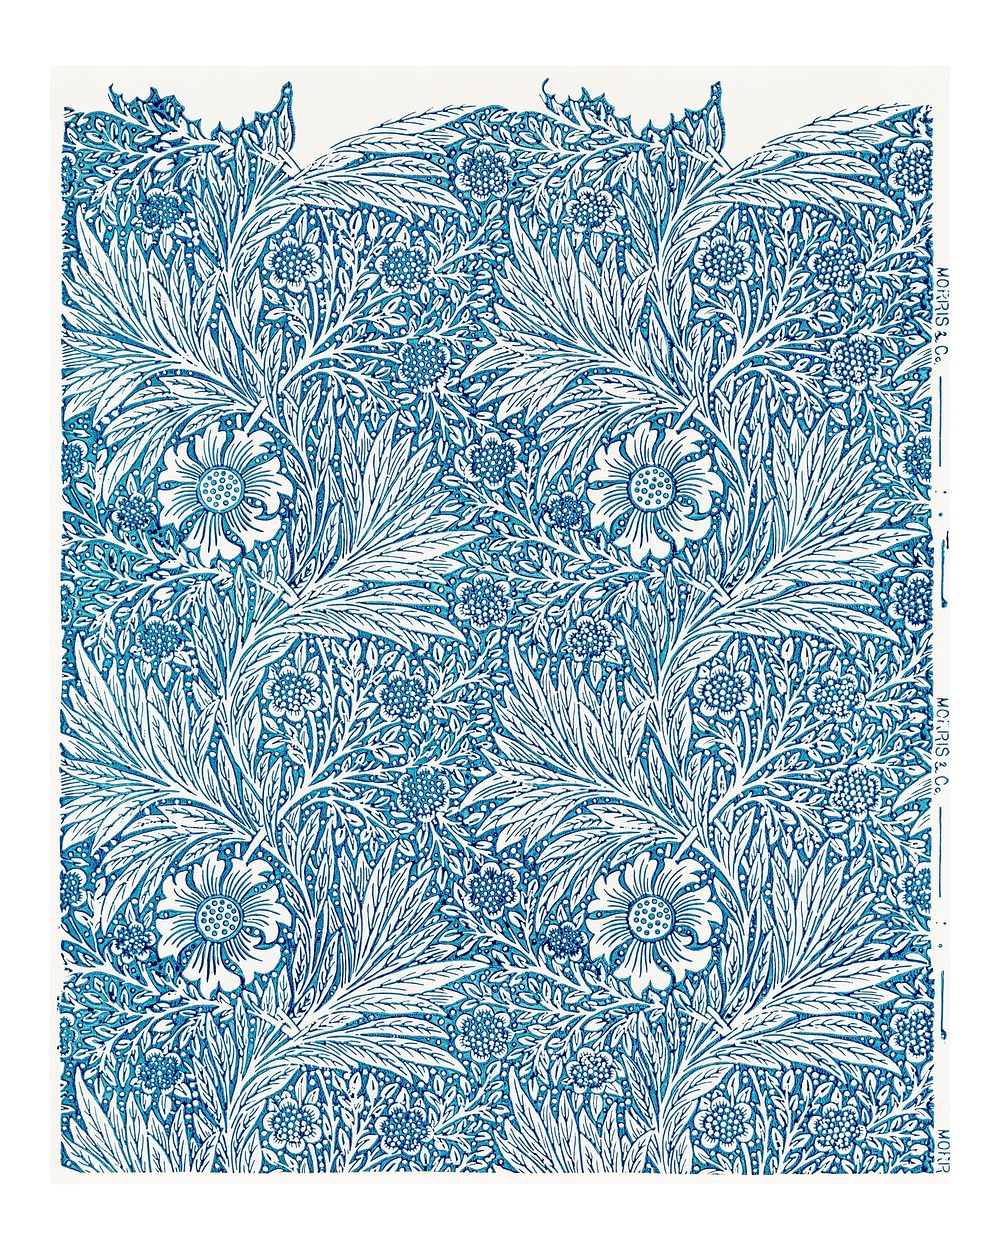 Blue marigold illustration wall art print and poster design remix from original artwork by William Morris.